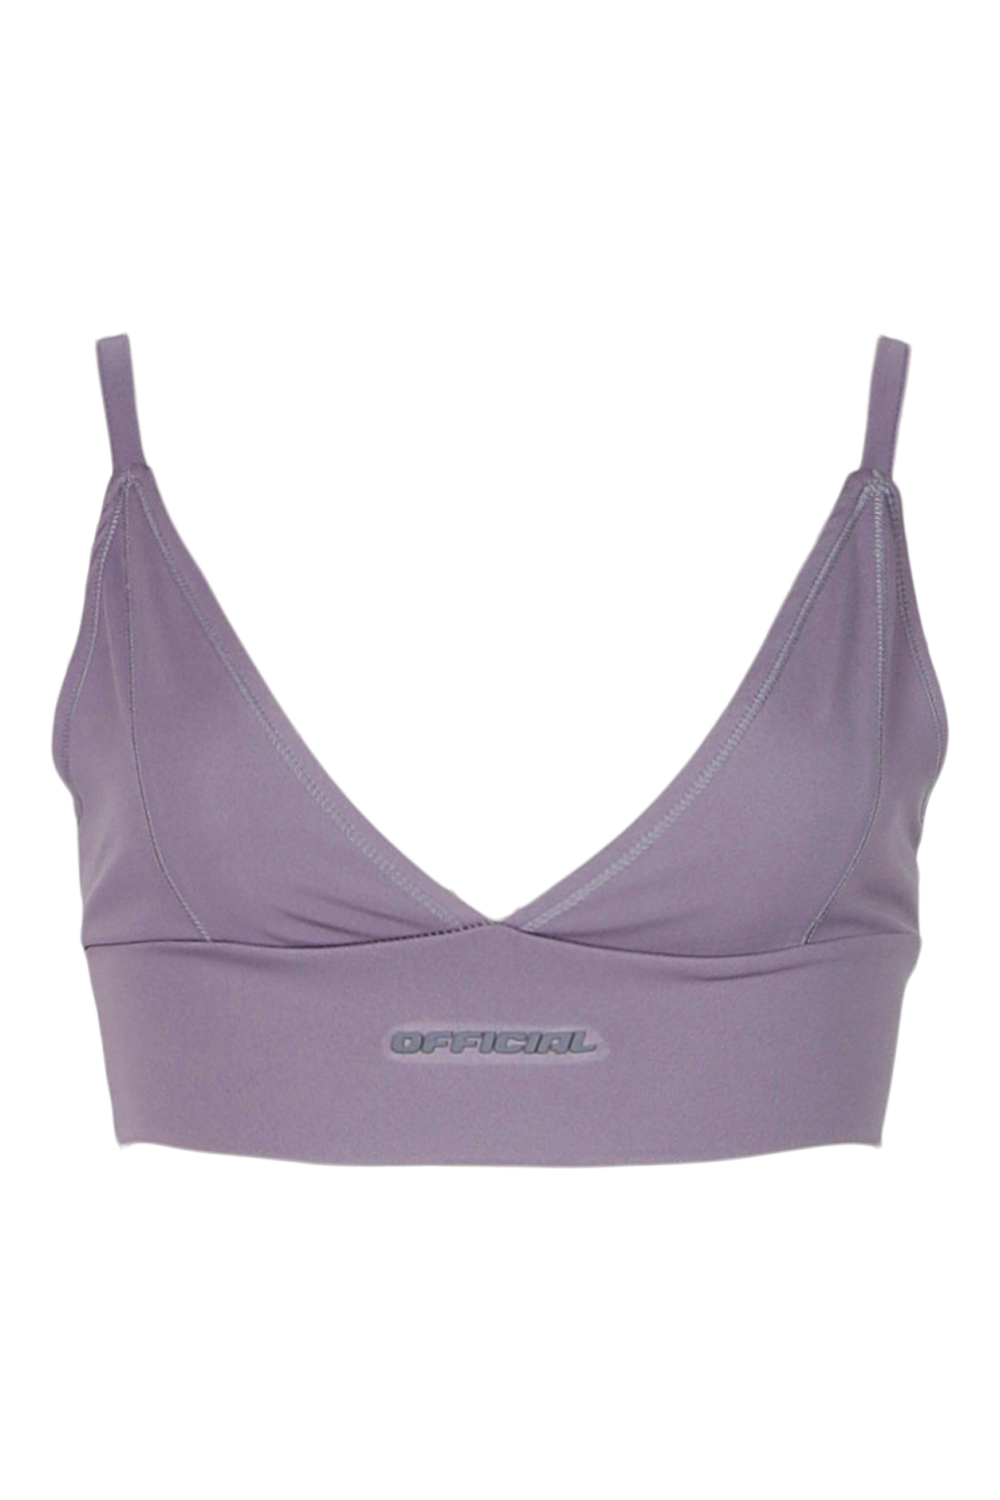 Ofcl Stitch Detail Bust Shaping Sports Bra